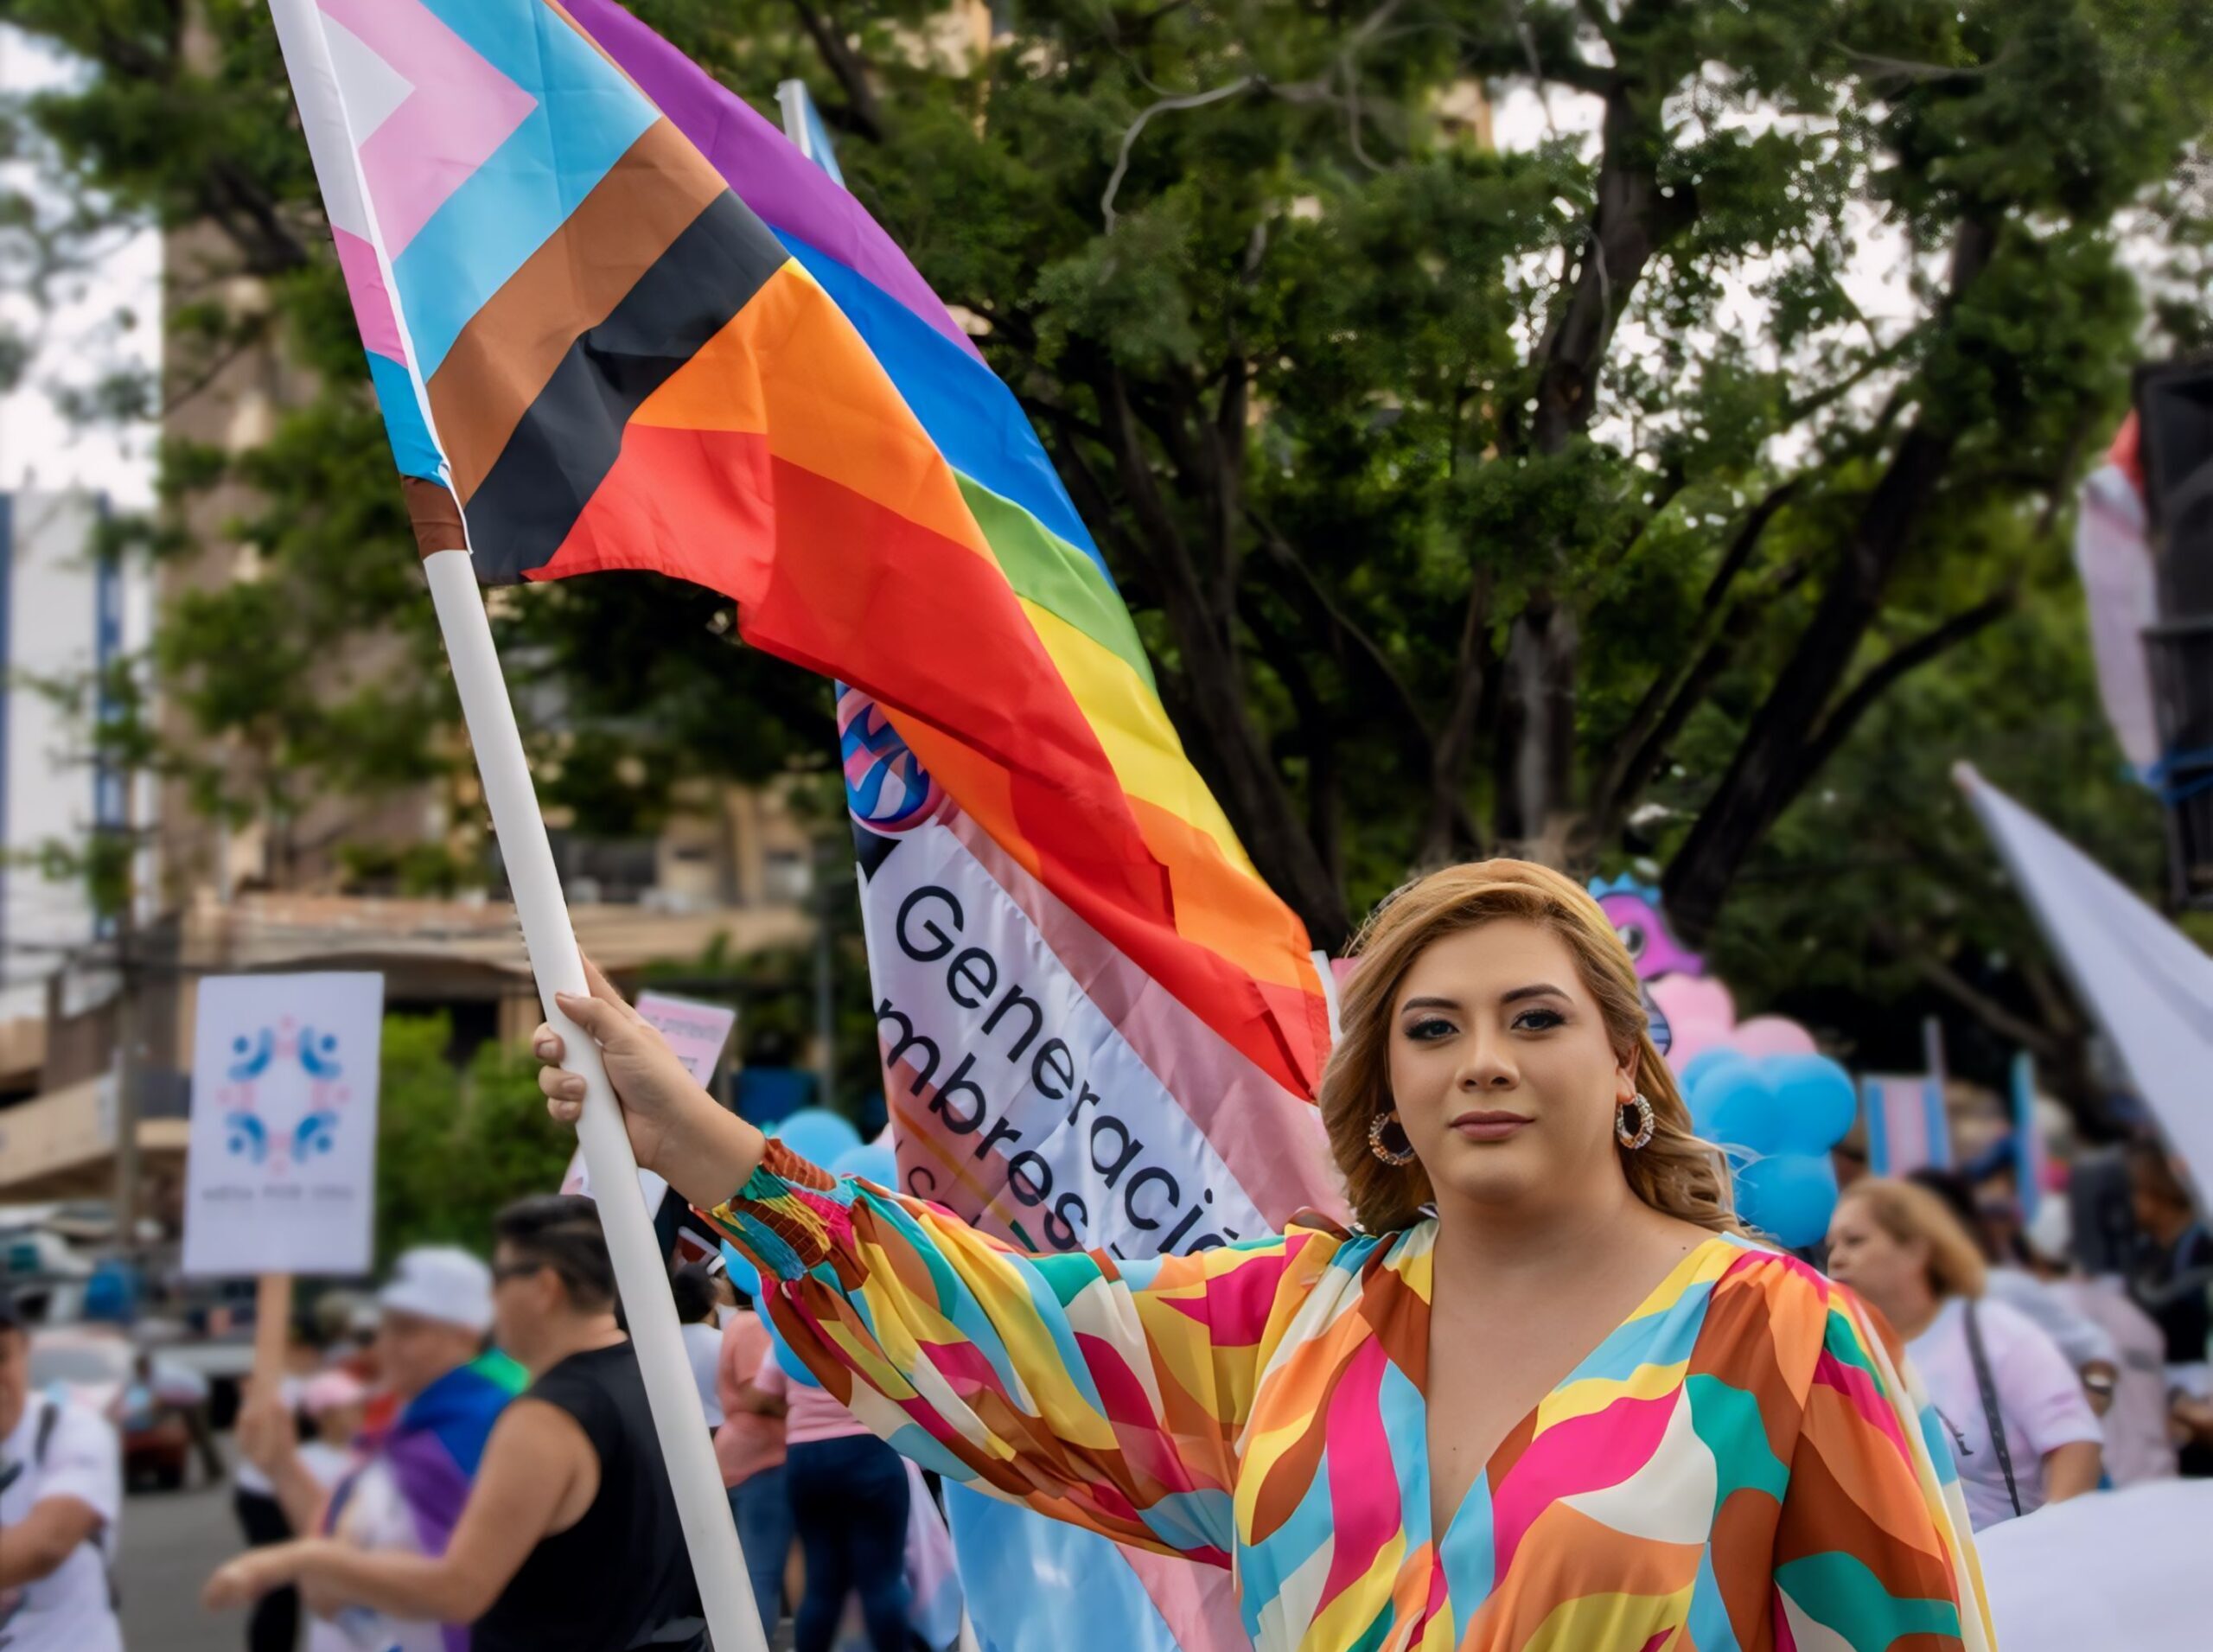 A trans woman wearing a multi-colored dress walks during a Pride parade, the progress pride flag in her right hand.